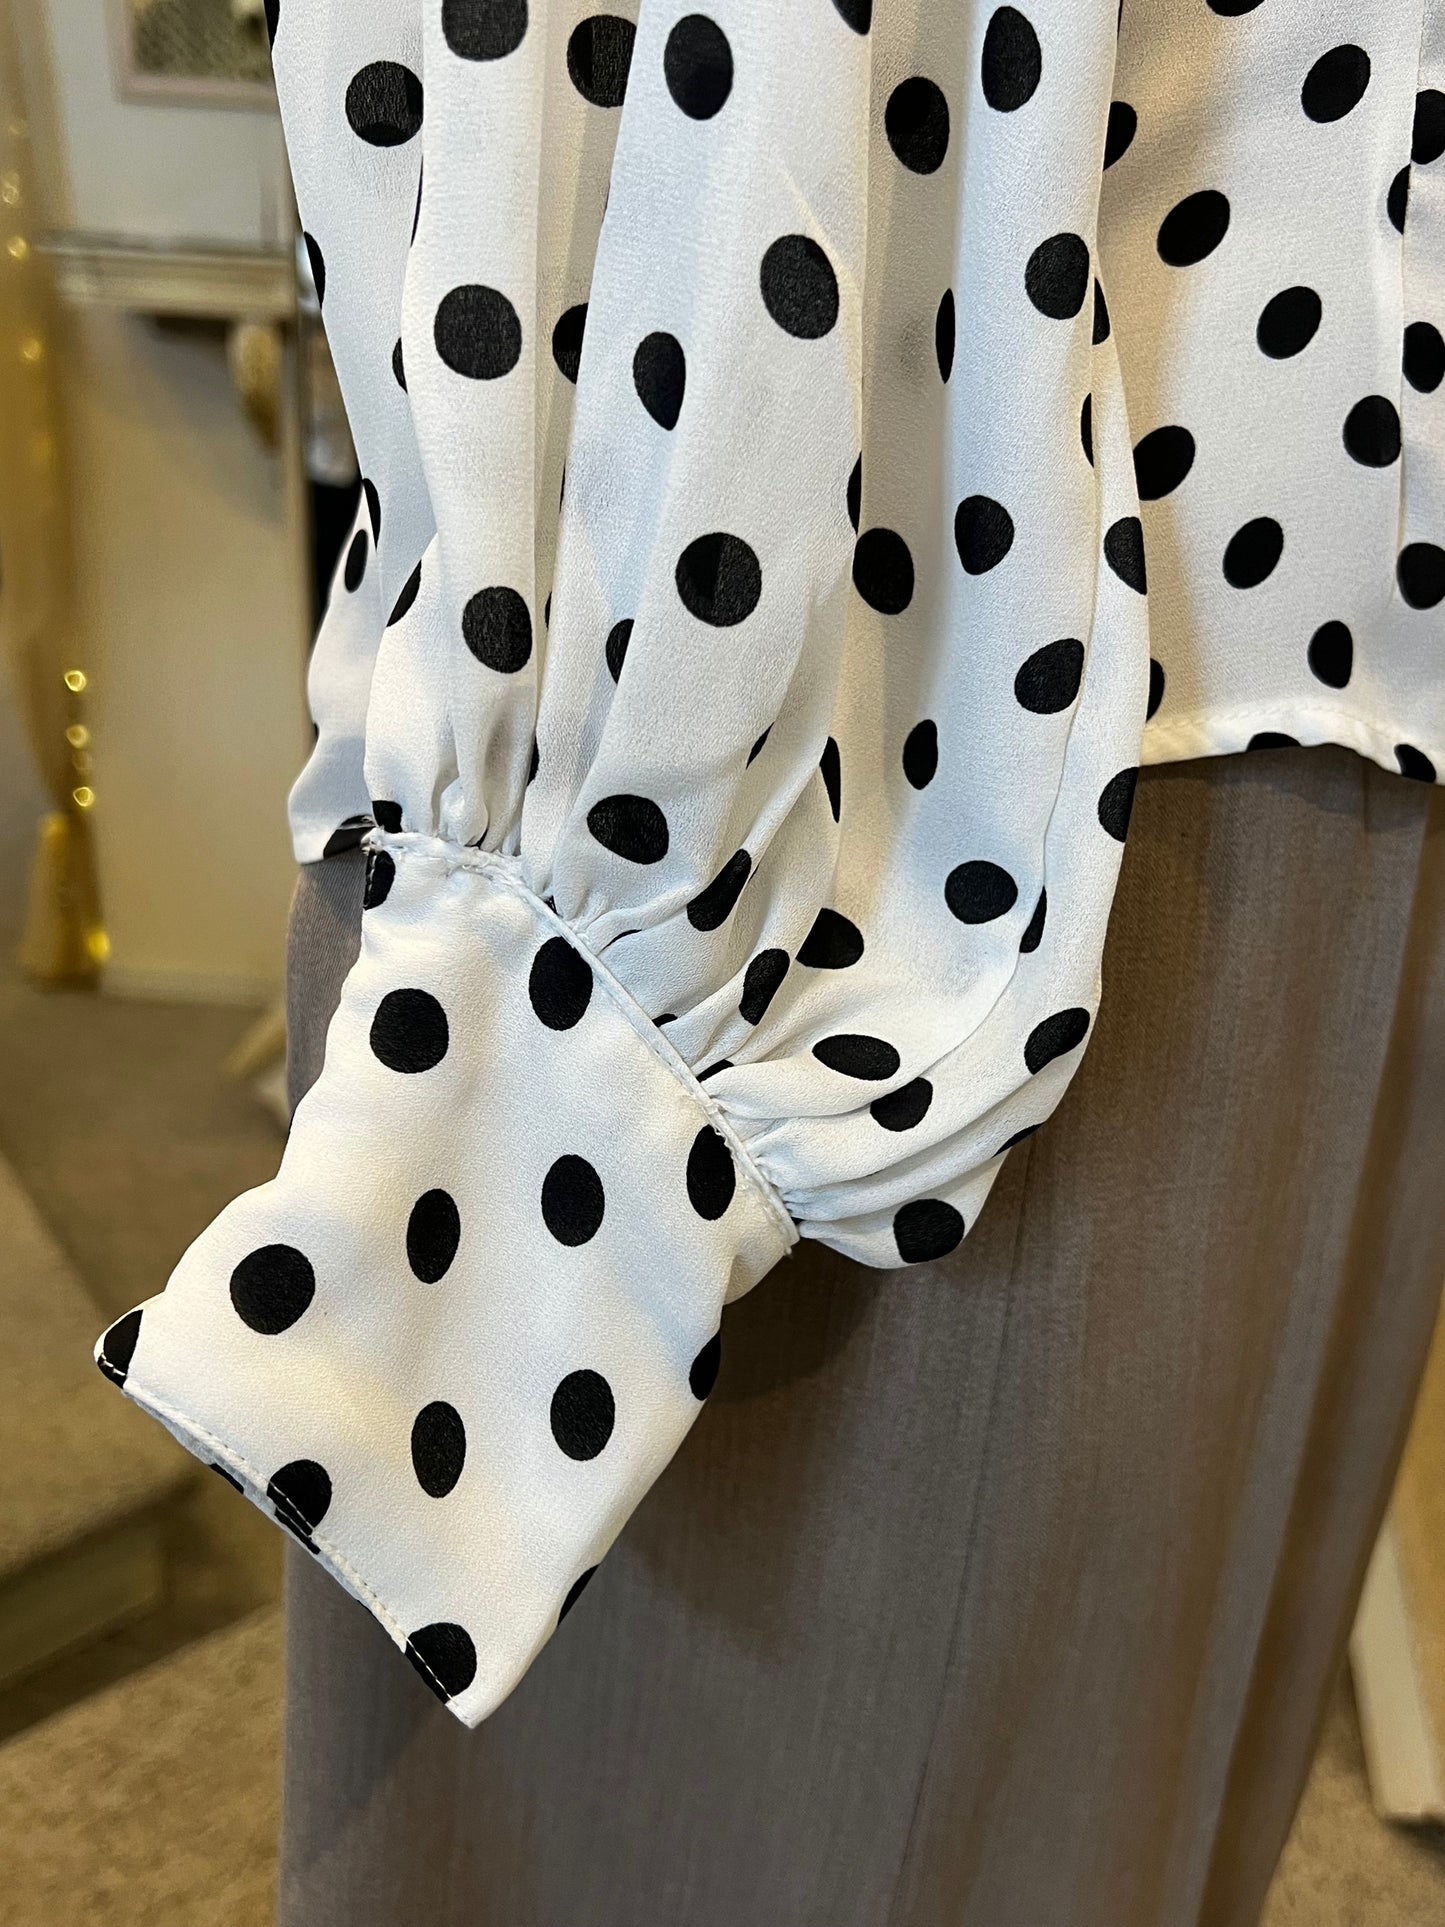 sleeve 1940s and 50s inspired blouse with polka dots